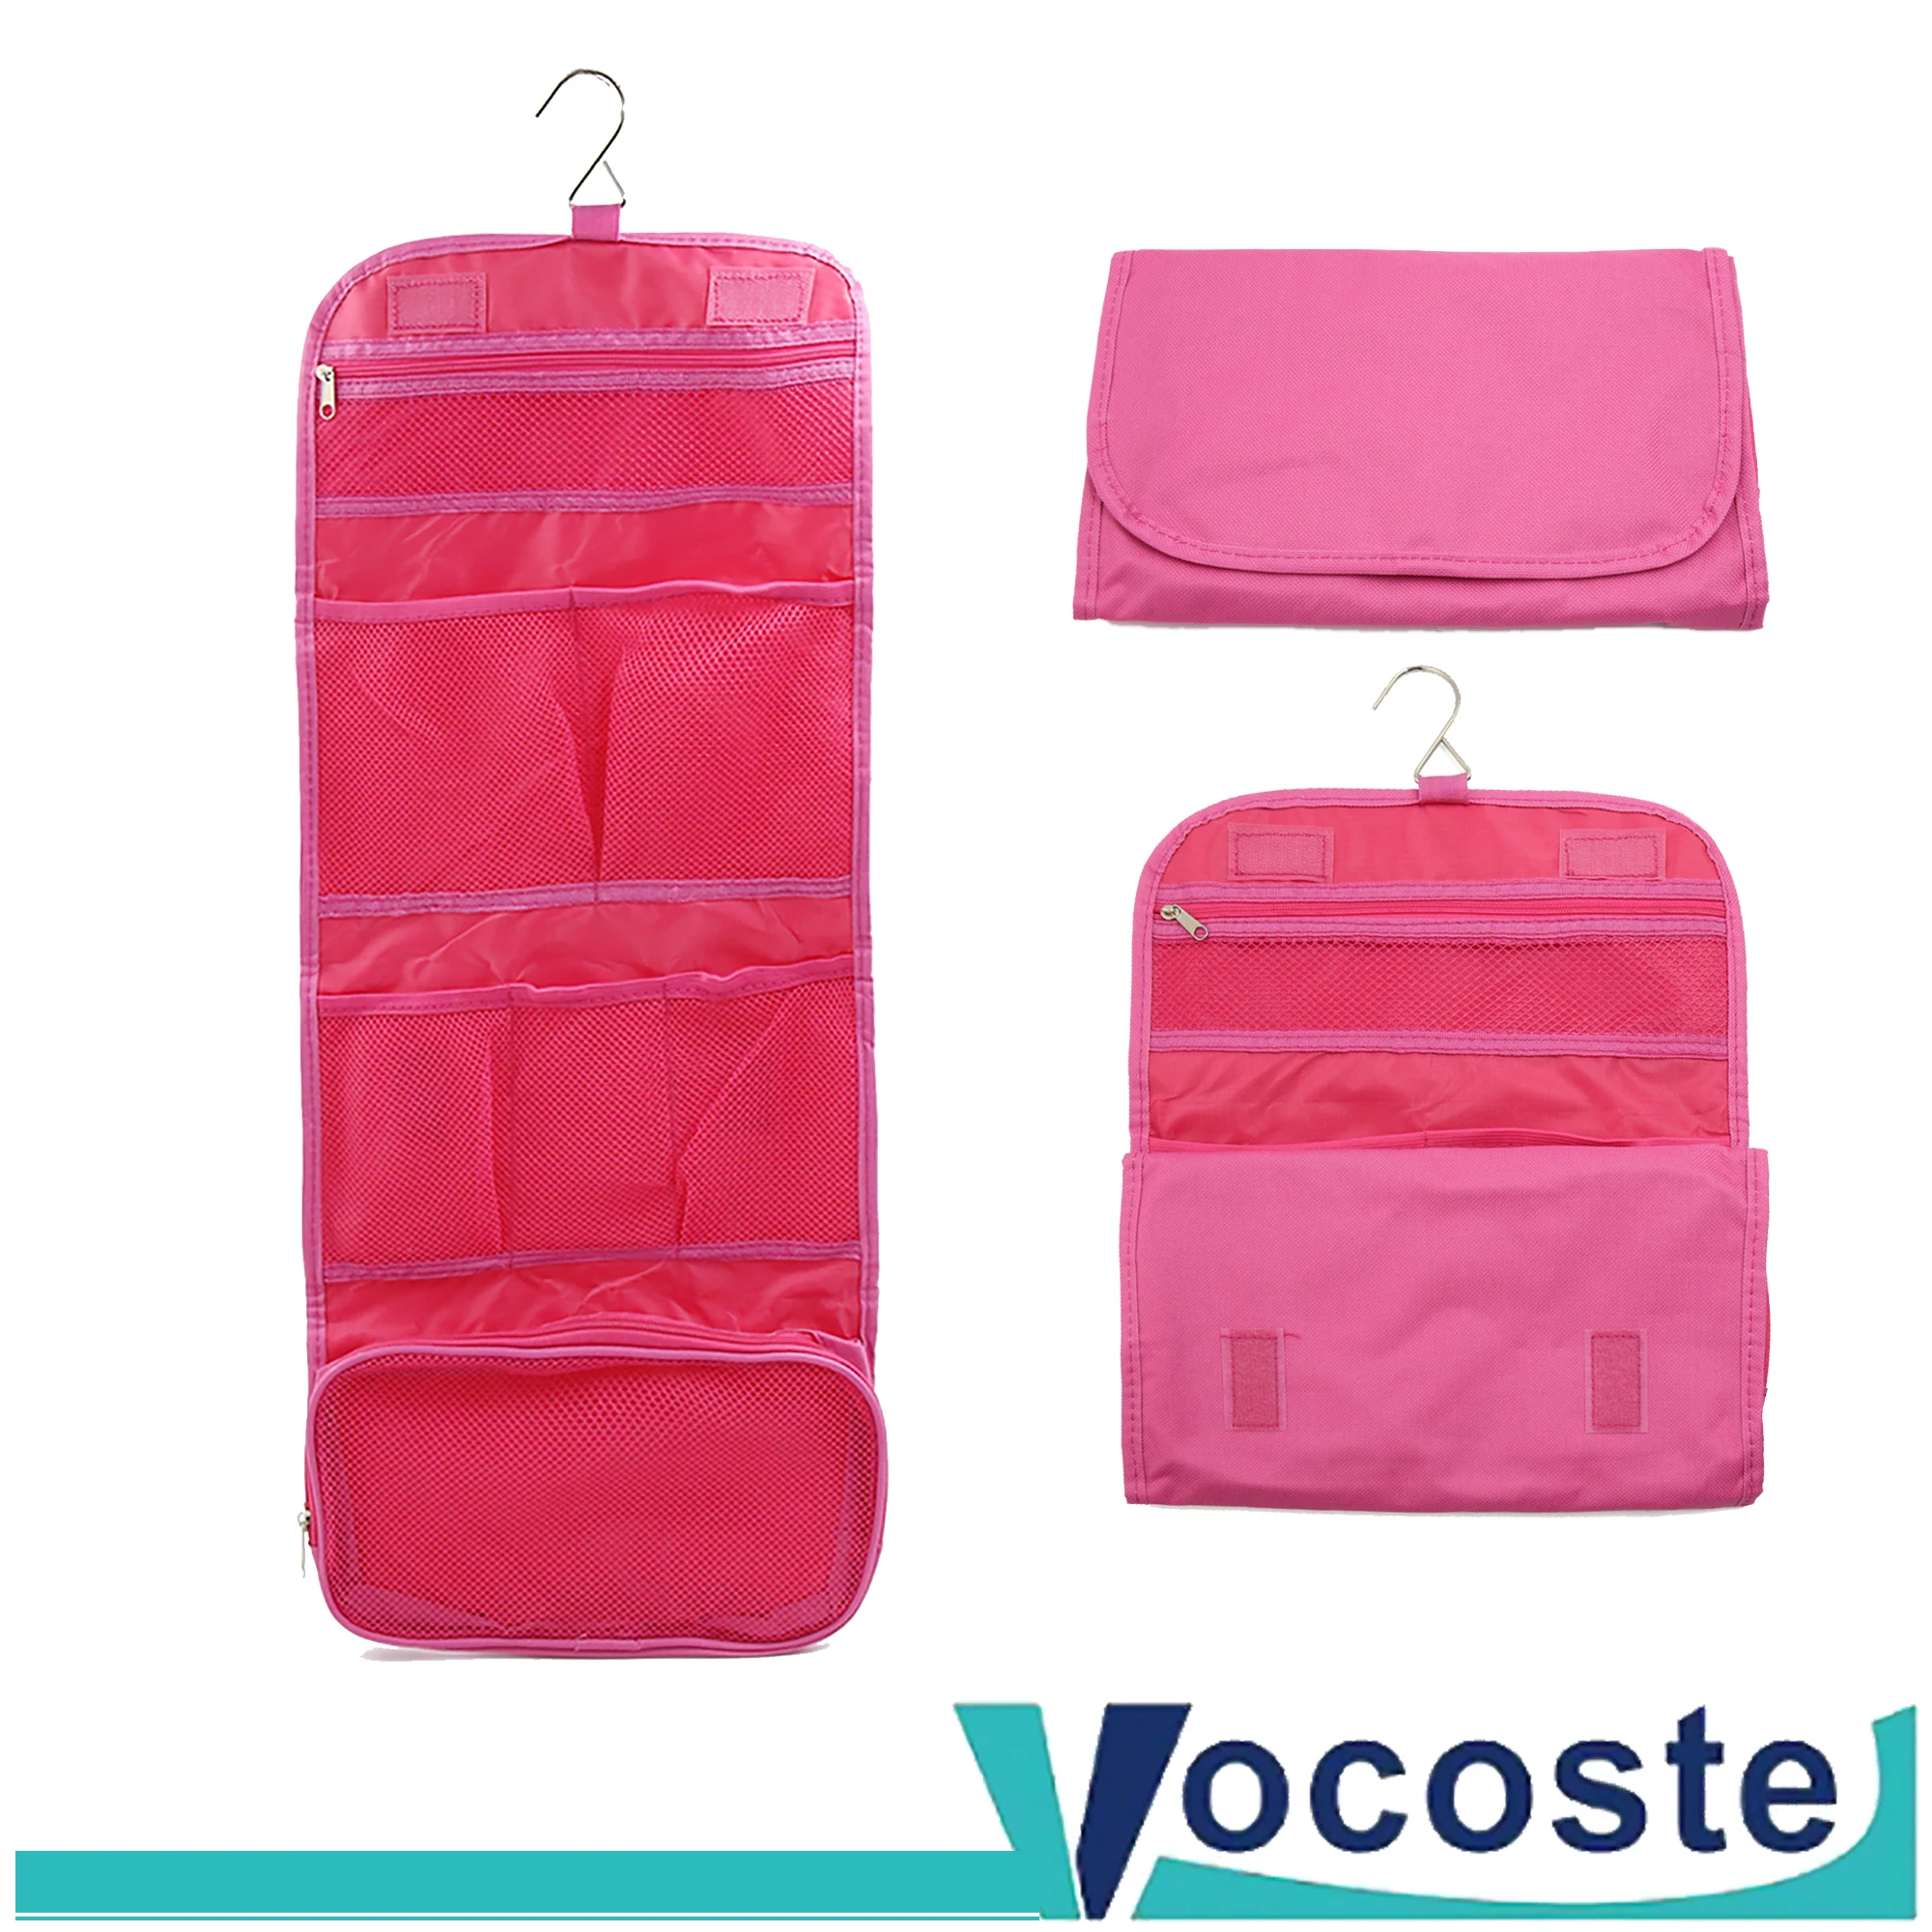 

VOCOSTE Outdoor Multifunction Travel Cosmetic Canvas Bag Toiletries Organizer Cosmetic Toiletry Storage Make up Cases Washbag